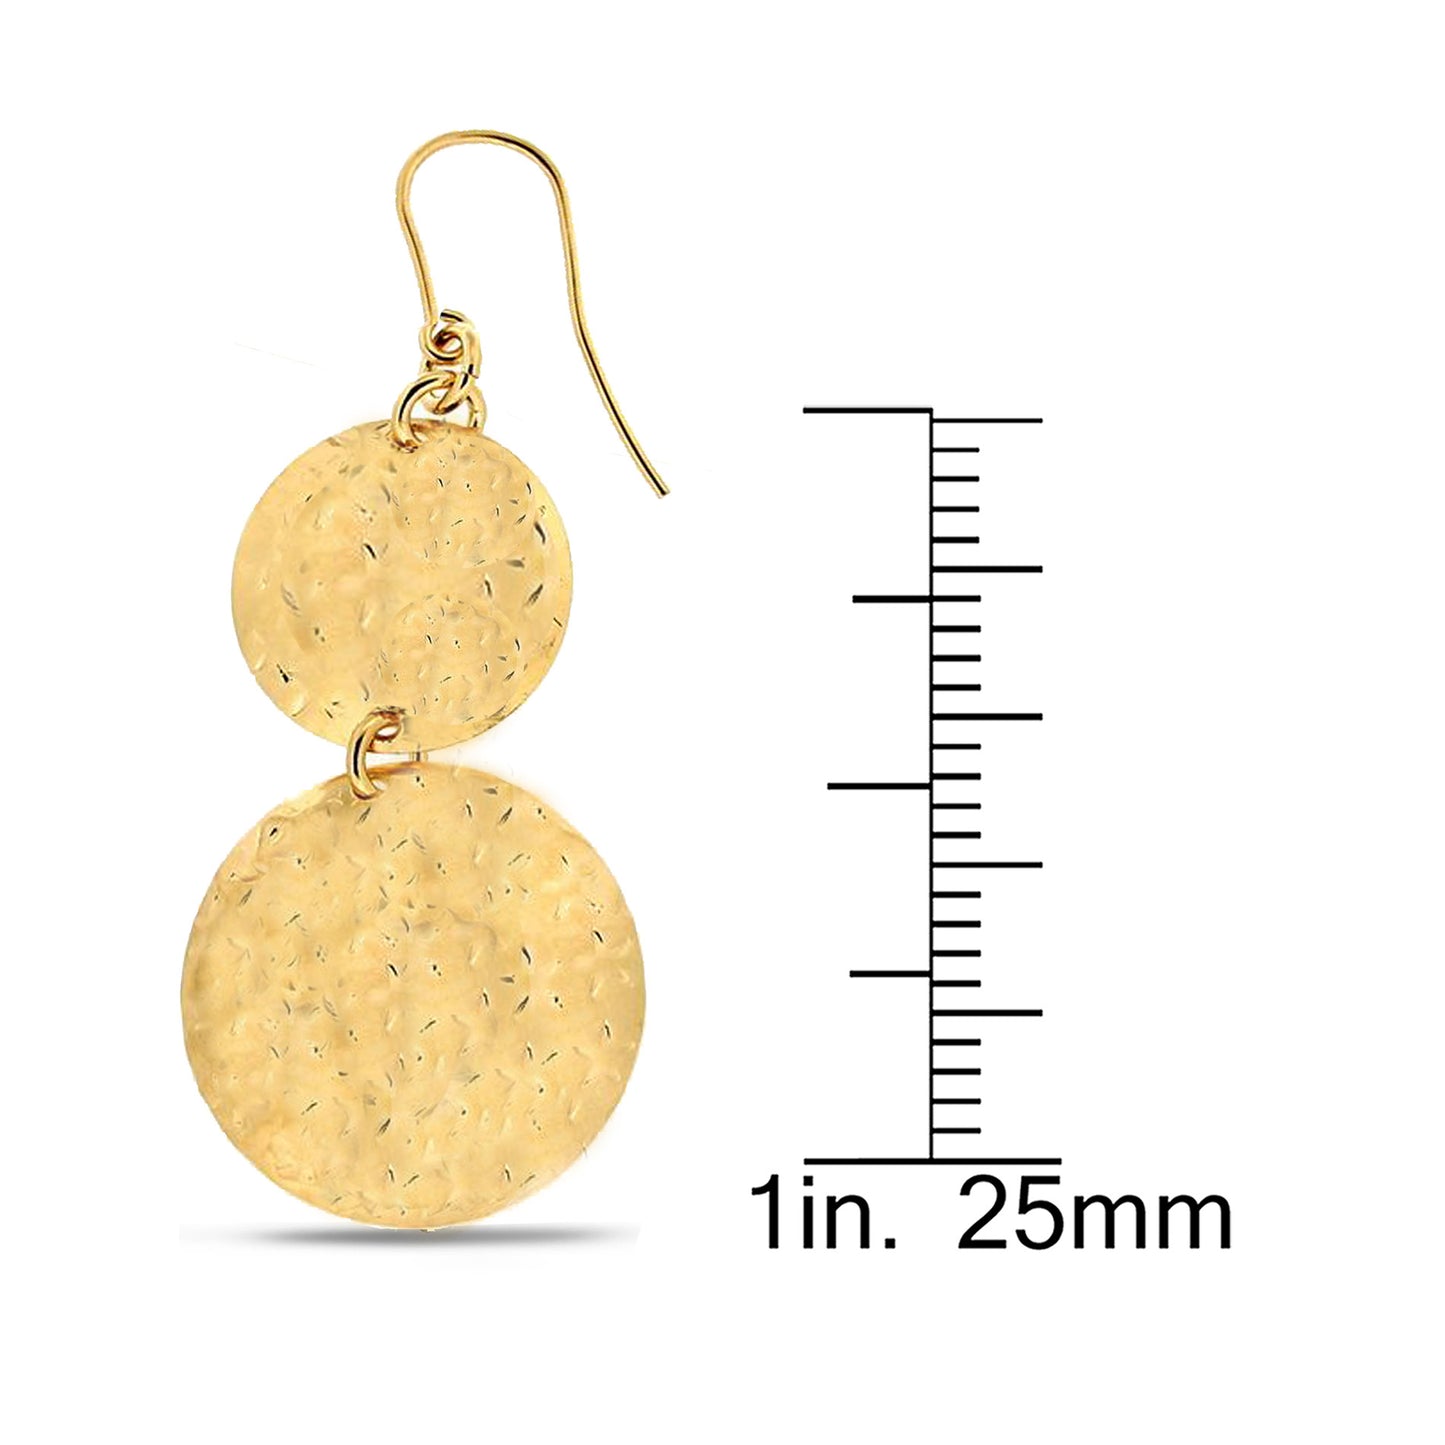 Double Hammered Disc Drop Earrings